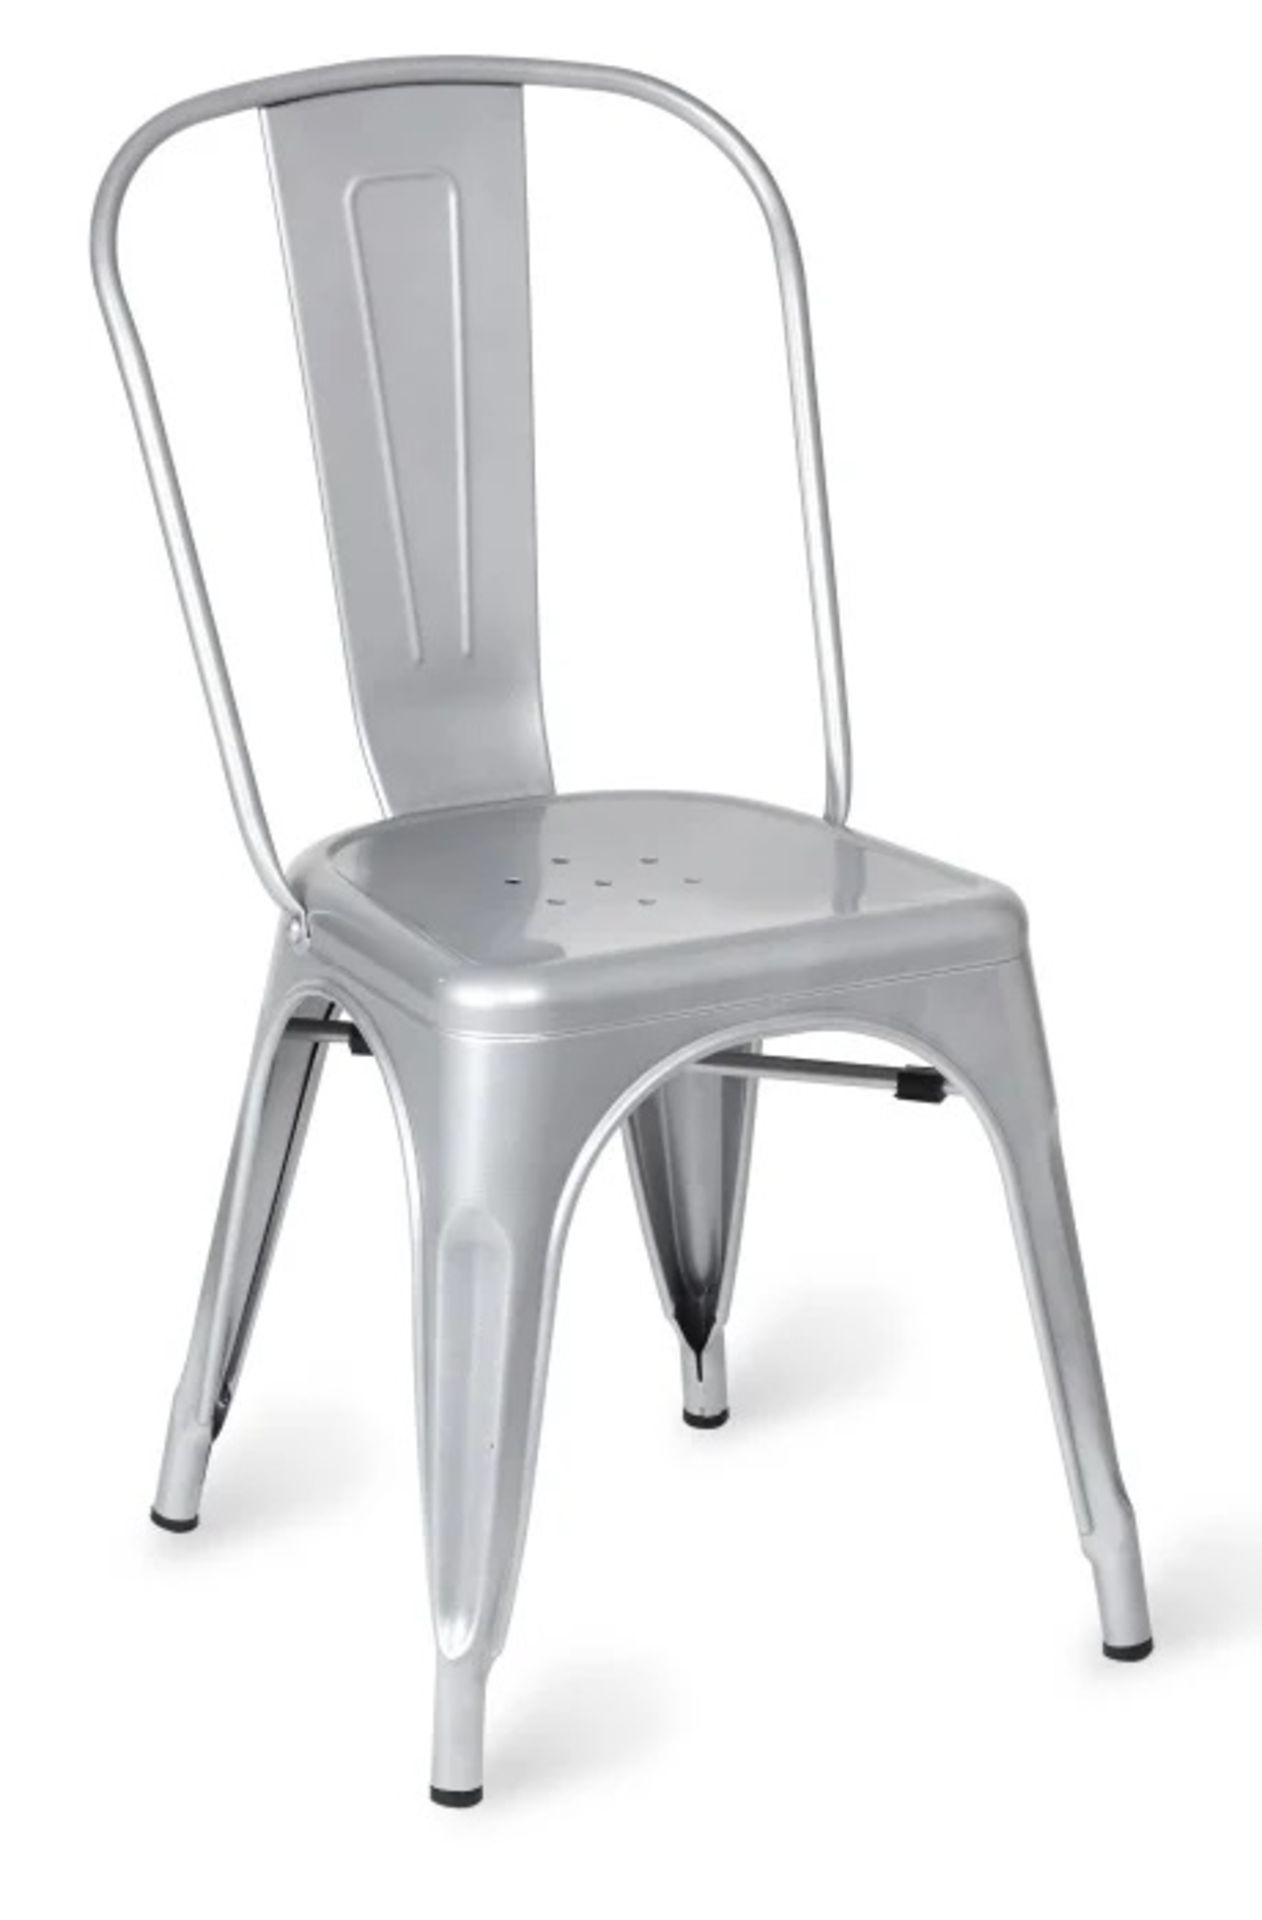 4 x Industrial Tolix Style Stackable Chairs - Finish: SILVER - Ideal For Bistros, Pub Gardens,